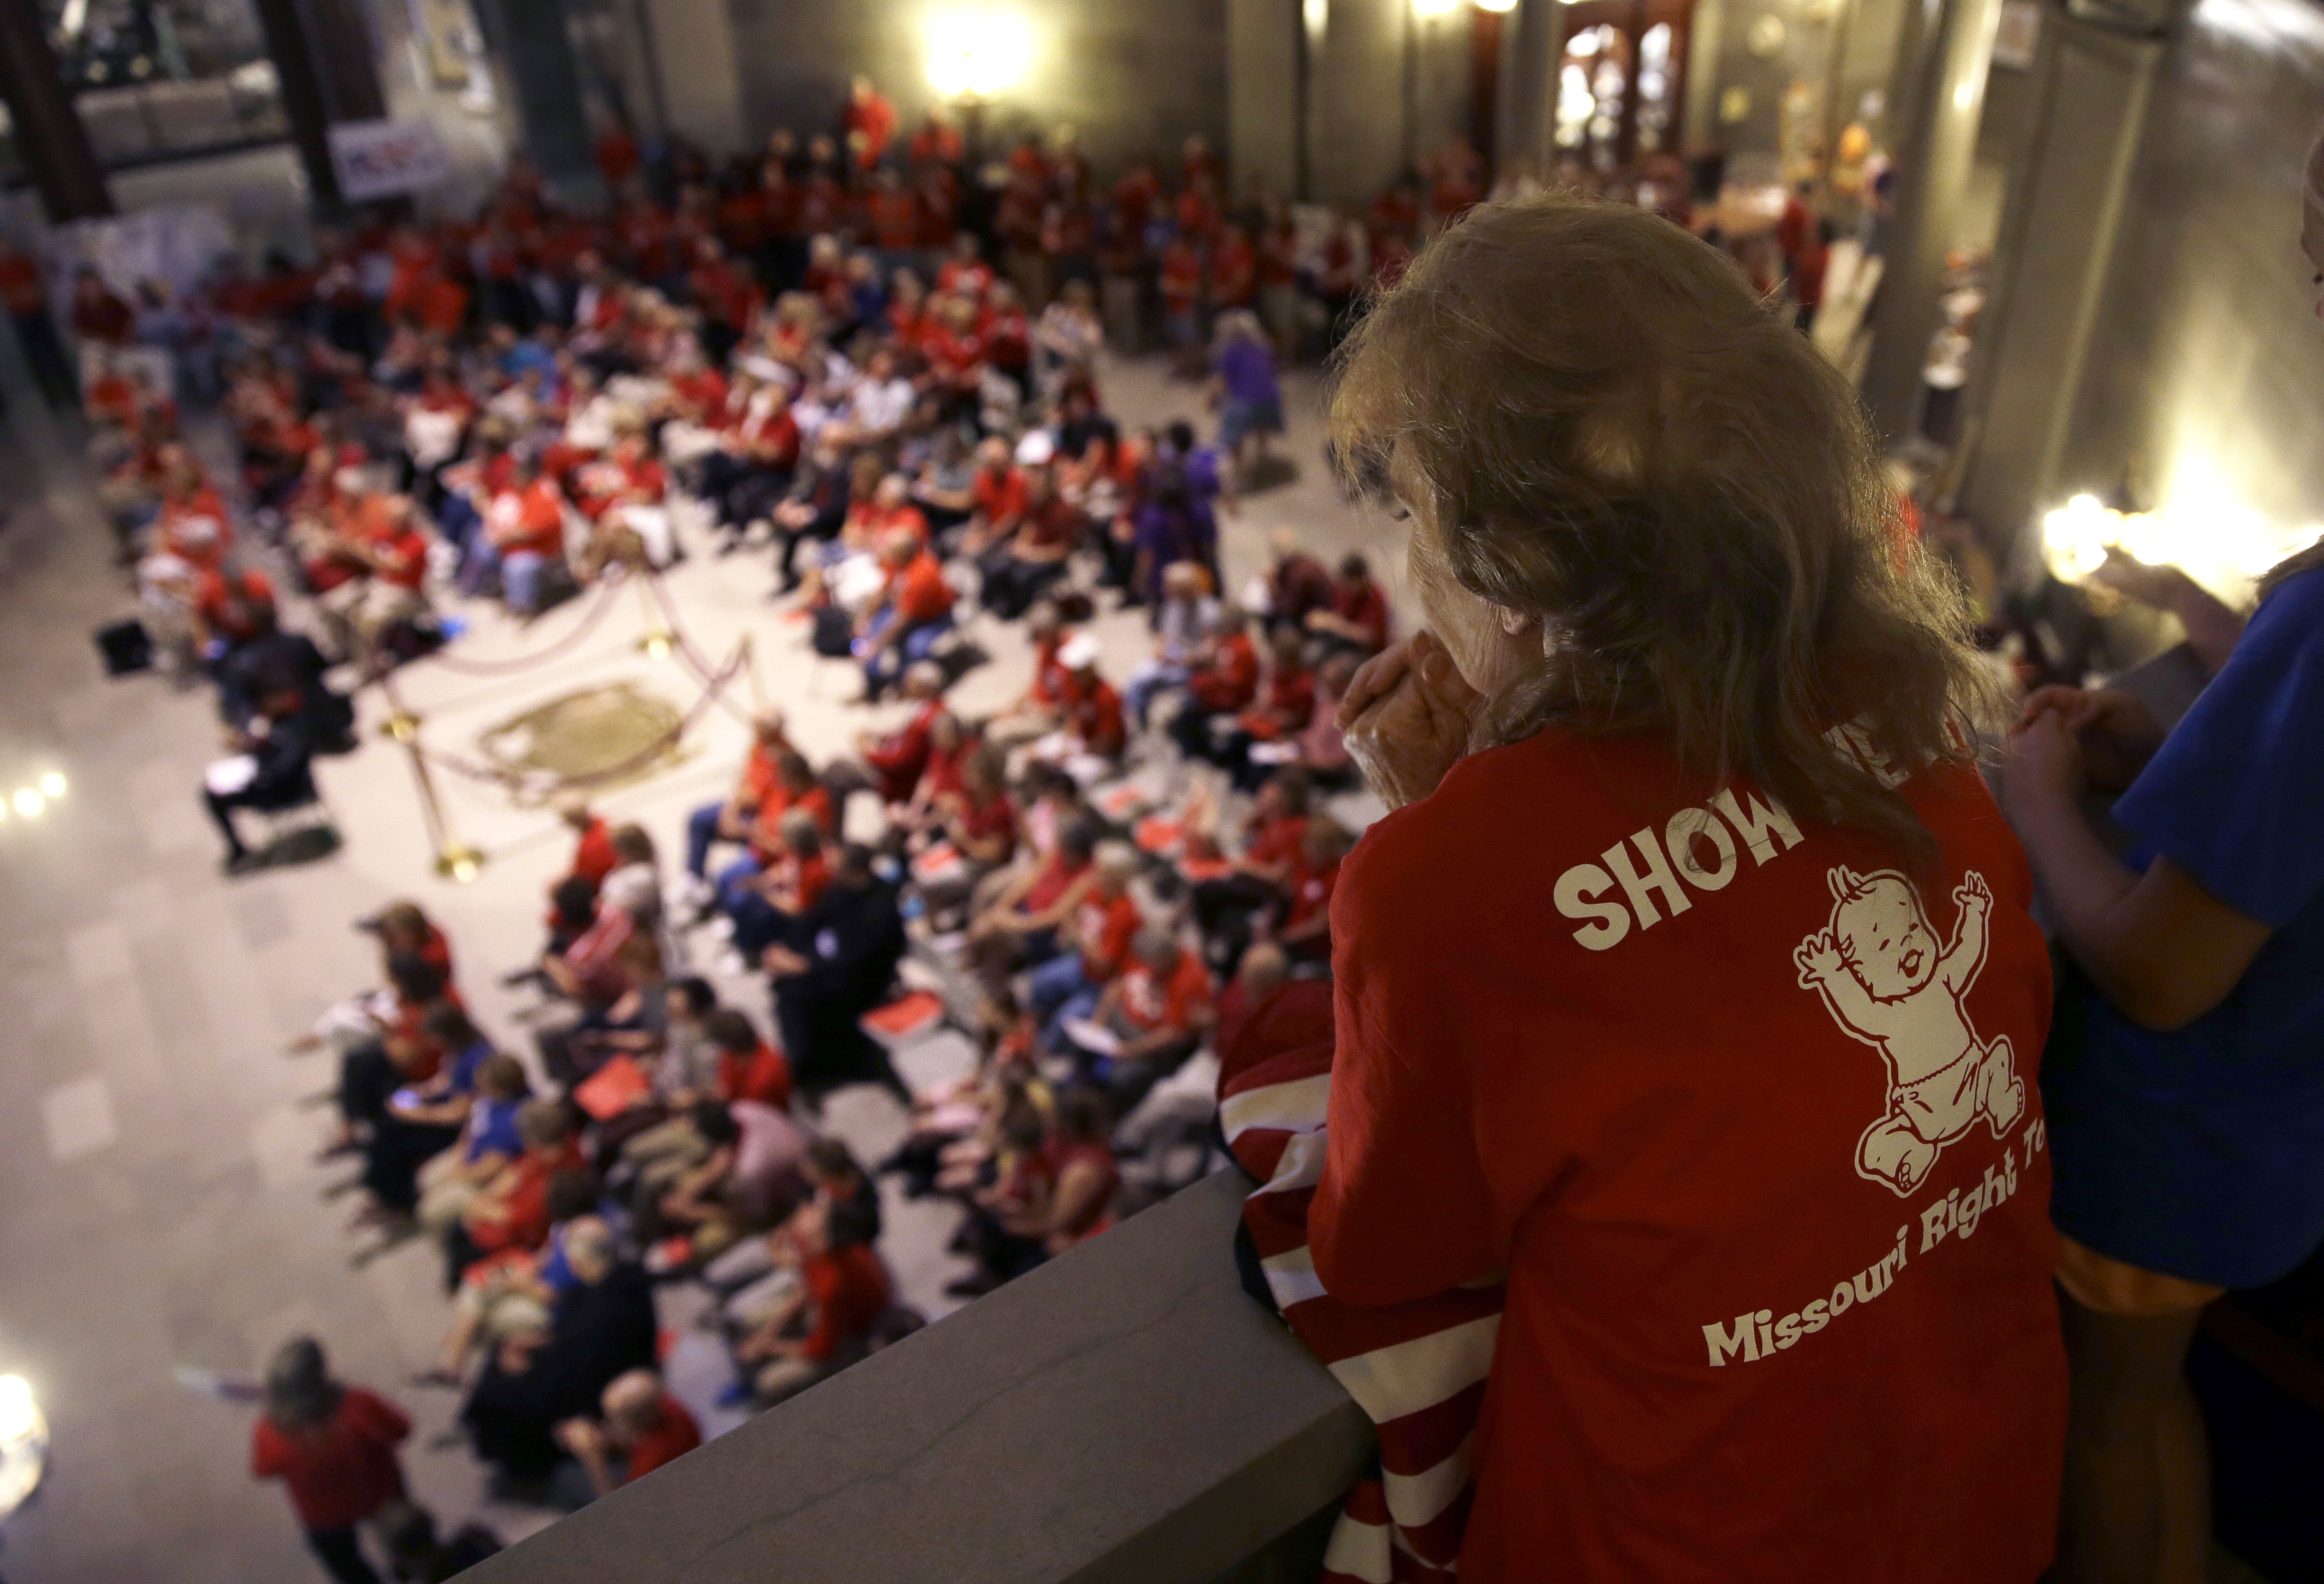 Elizabeth War looks over a gathering of her fellow abortion opponents in the Missouri Capitol rotunda in Jefferson City, Mo. on Sept. 10, 2014. (Jeff Roberson—AP)